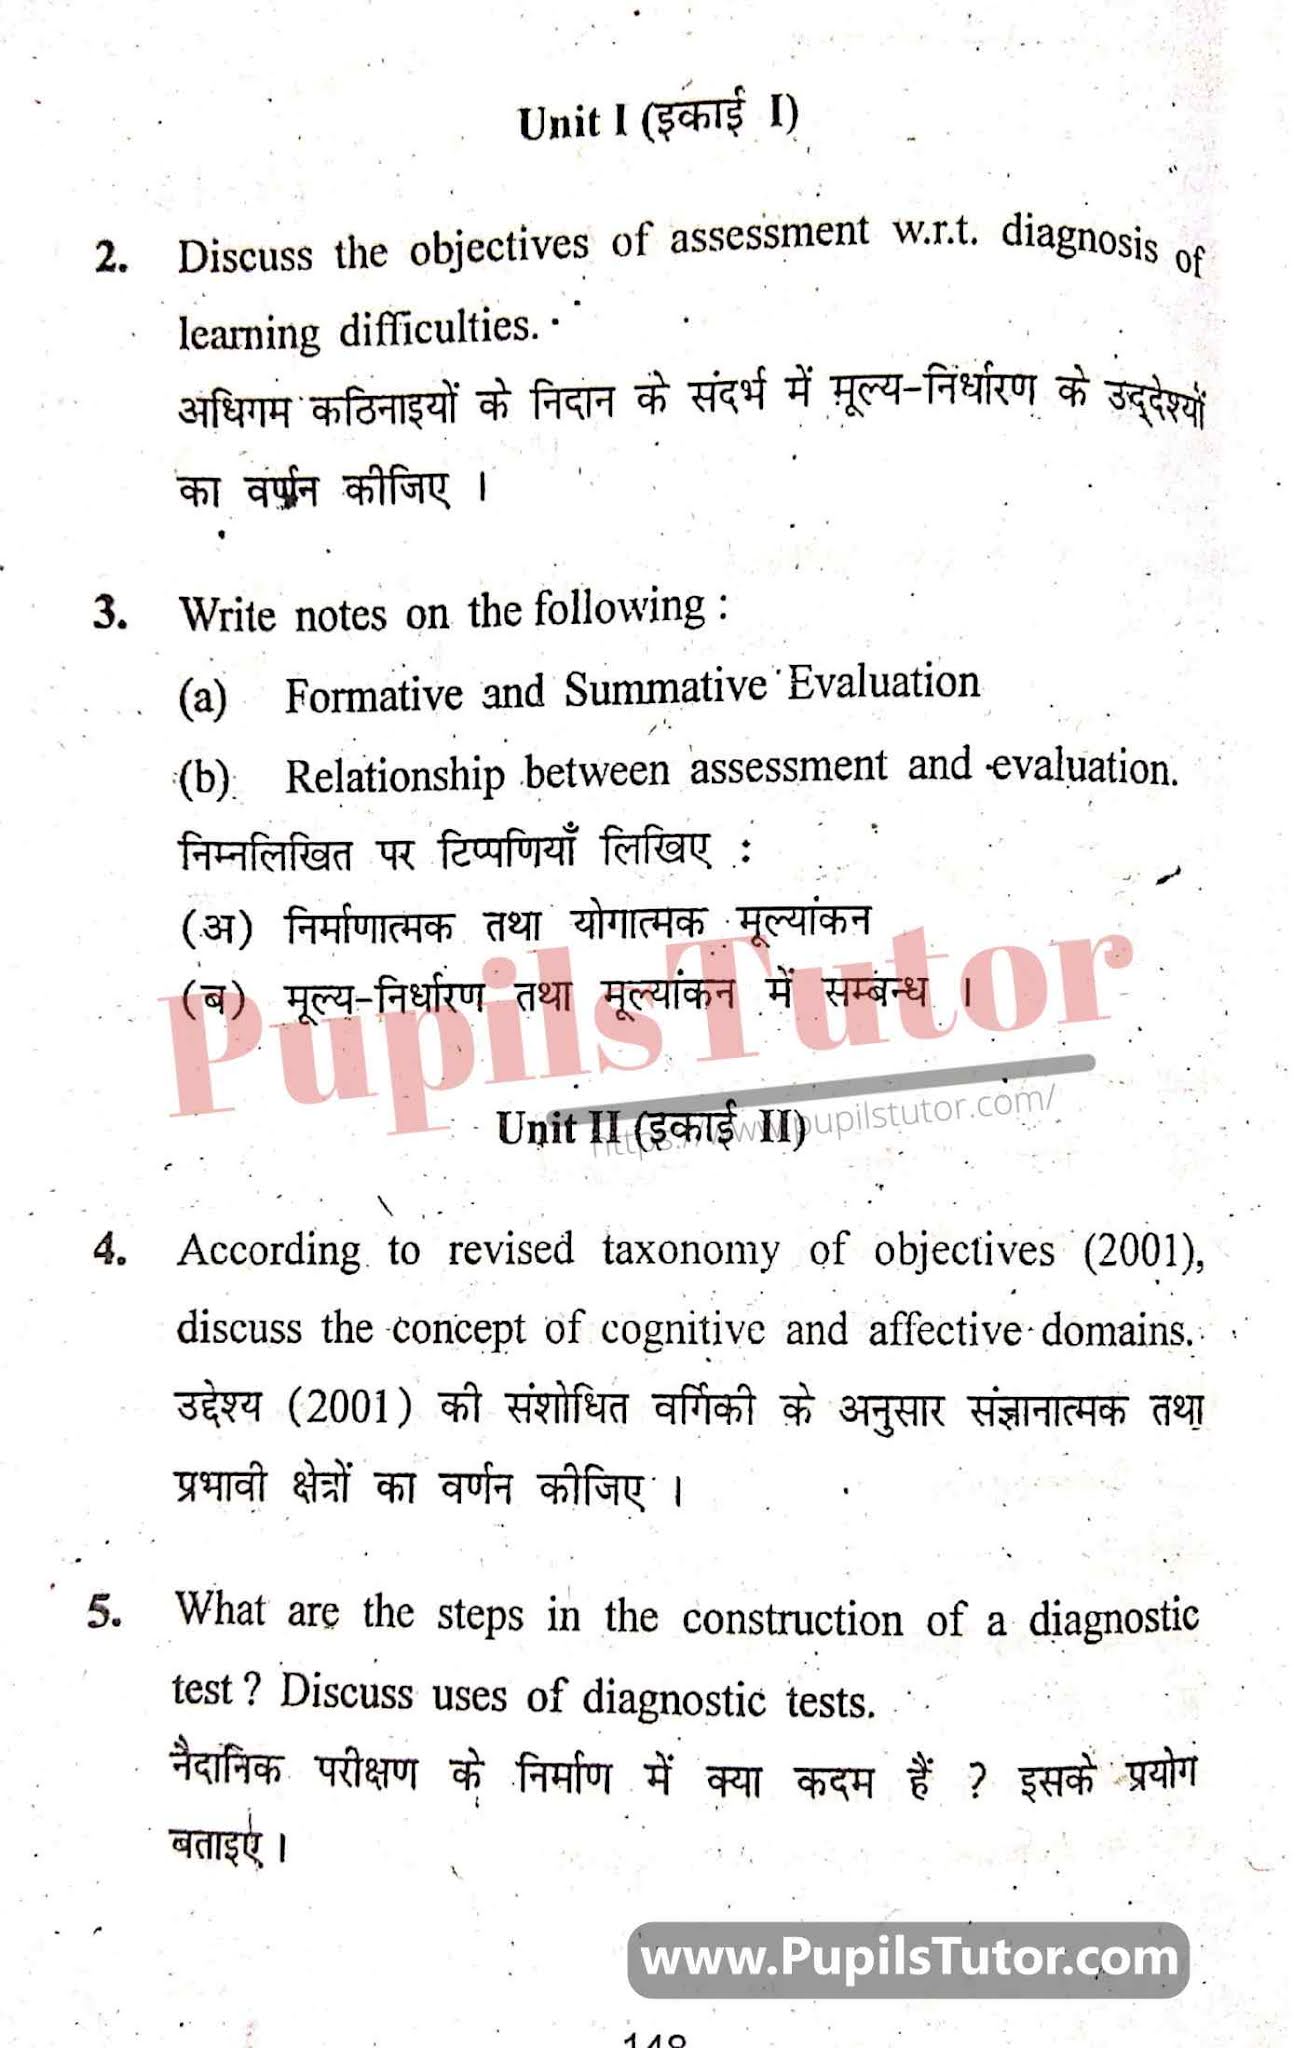 KUK (Kurukshetra University, Haryana) Assessment For Learning Question Paper 2019 For B.Ed 1st And 2nd Year And All The 4 Semesters In English And Hindi Medium Free Download PDF - Page 2 - www.pupilstutor.com